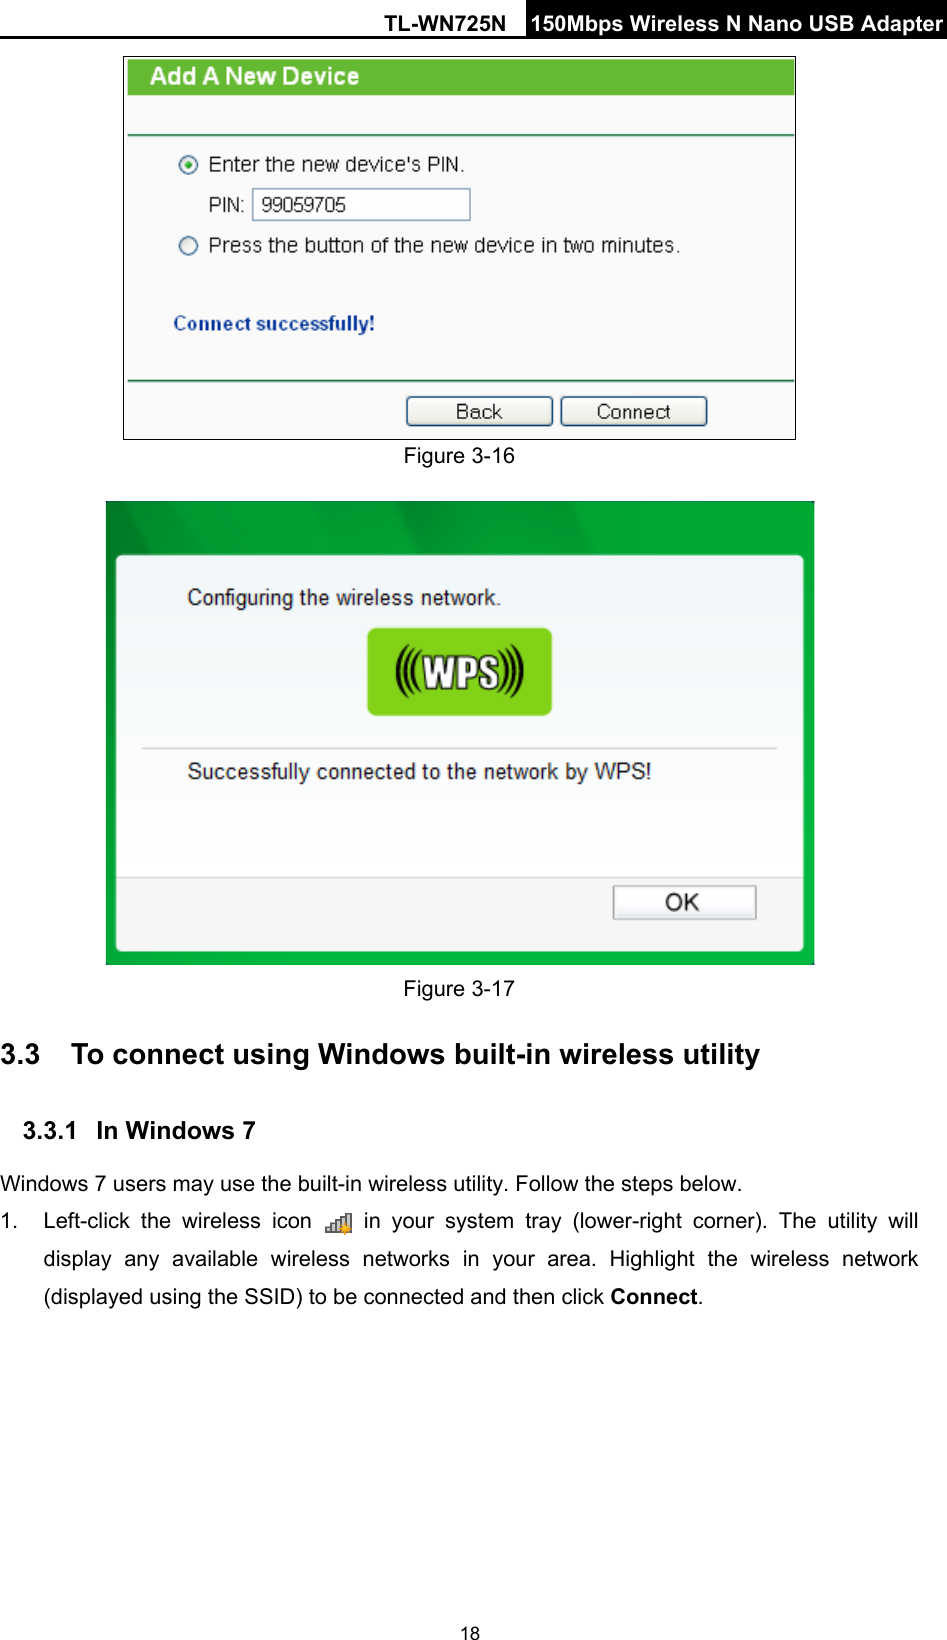 TL-WN725N 150Mbps Wireless N Nano USB Adapter   18  Figure 3-16  Figure 3-17 3.3 To connect using Windows built-in wireless utility 3.3.1 In Windows 7 Windows 7 users may use the built-in wireless utility. Follow the steps below. 1. Left-click the wireless icon   in your system tray (lower-right corner). The utility will display any available wireless networks in your area. Highlight the wireless network (displayed using the SSID) to be connected and then click Connect.   